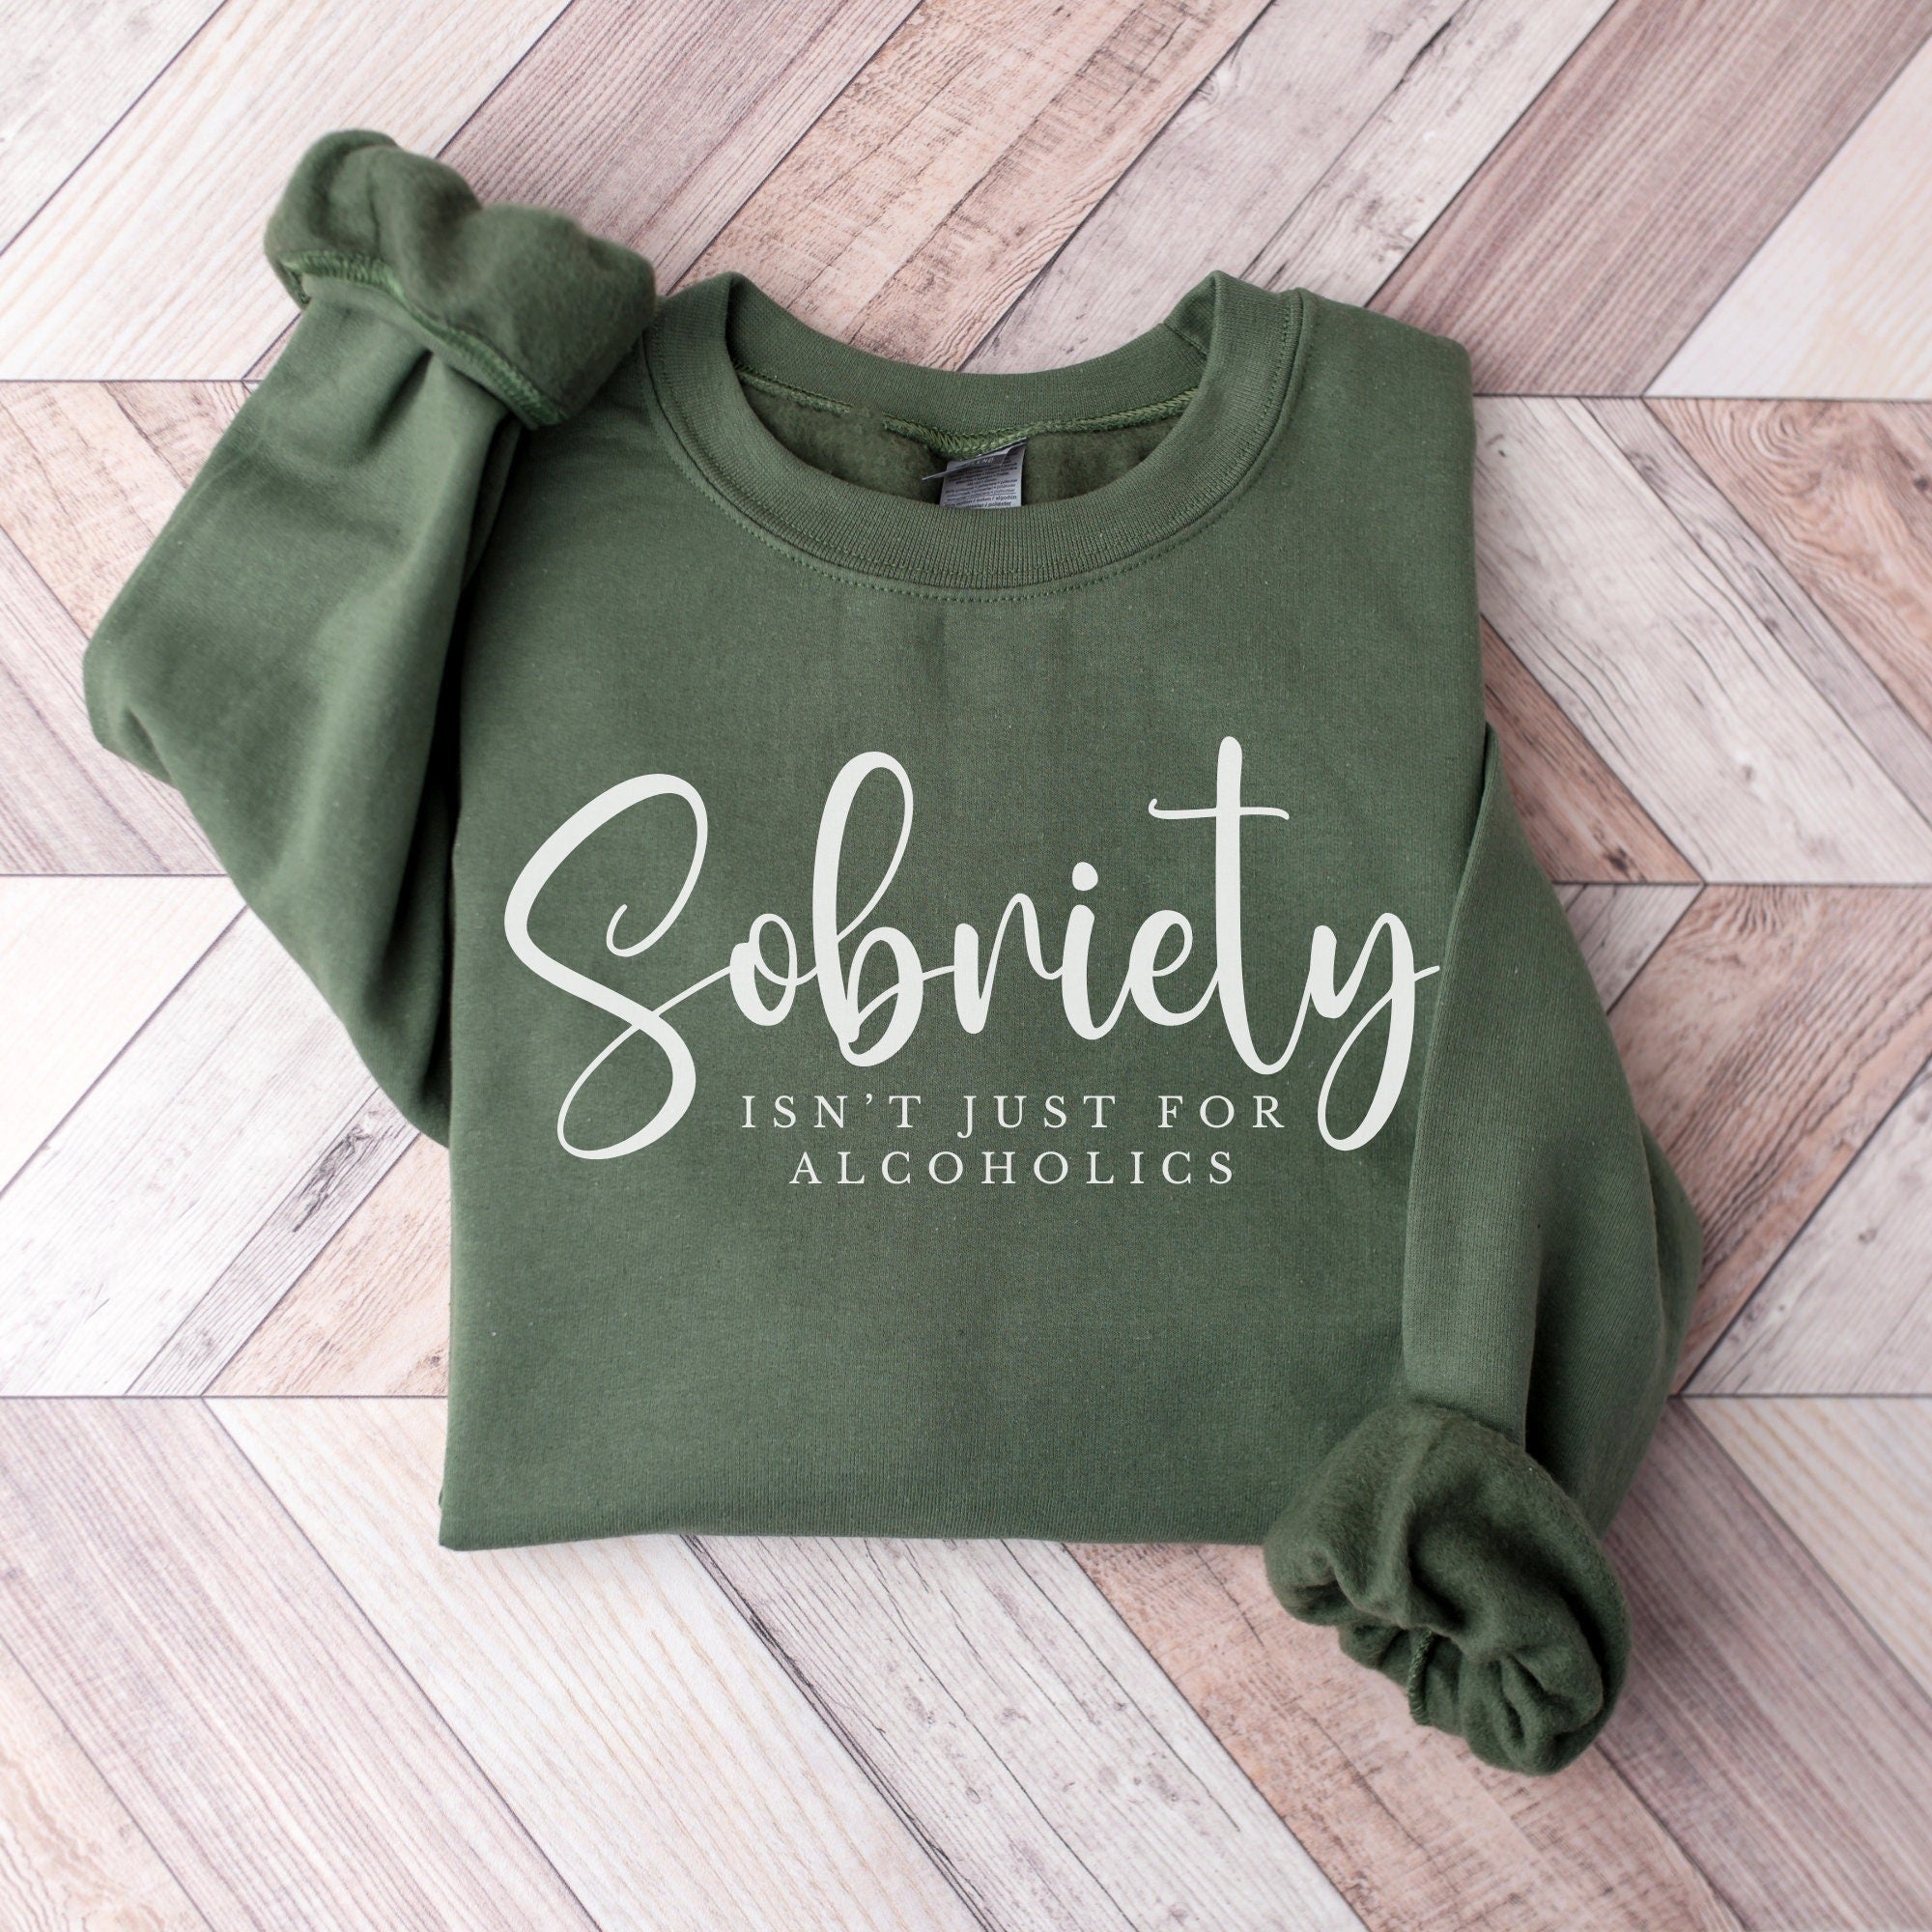 Sobriety Isn't Just For Alcoholics Crewneck